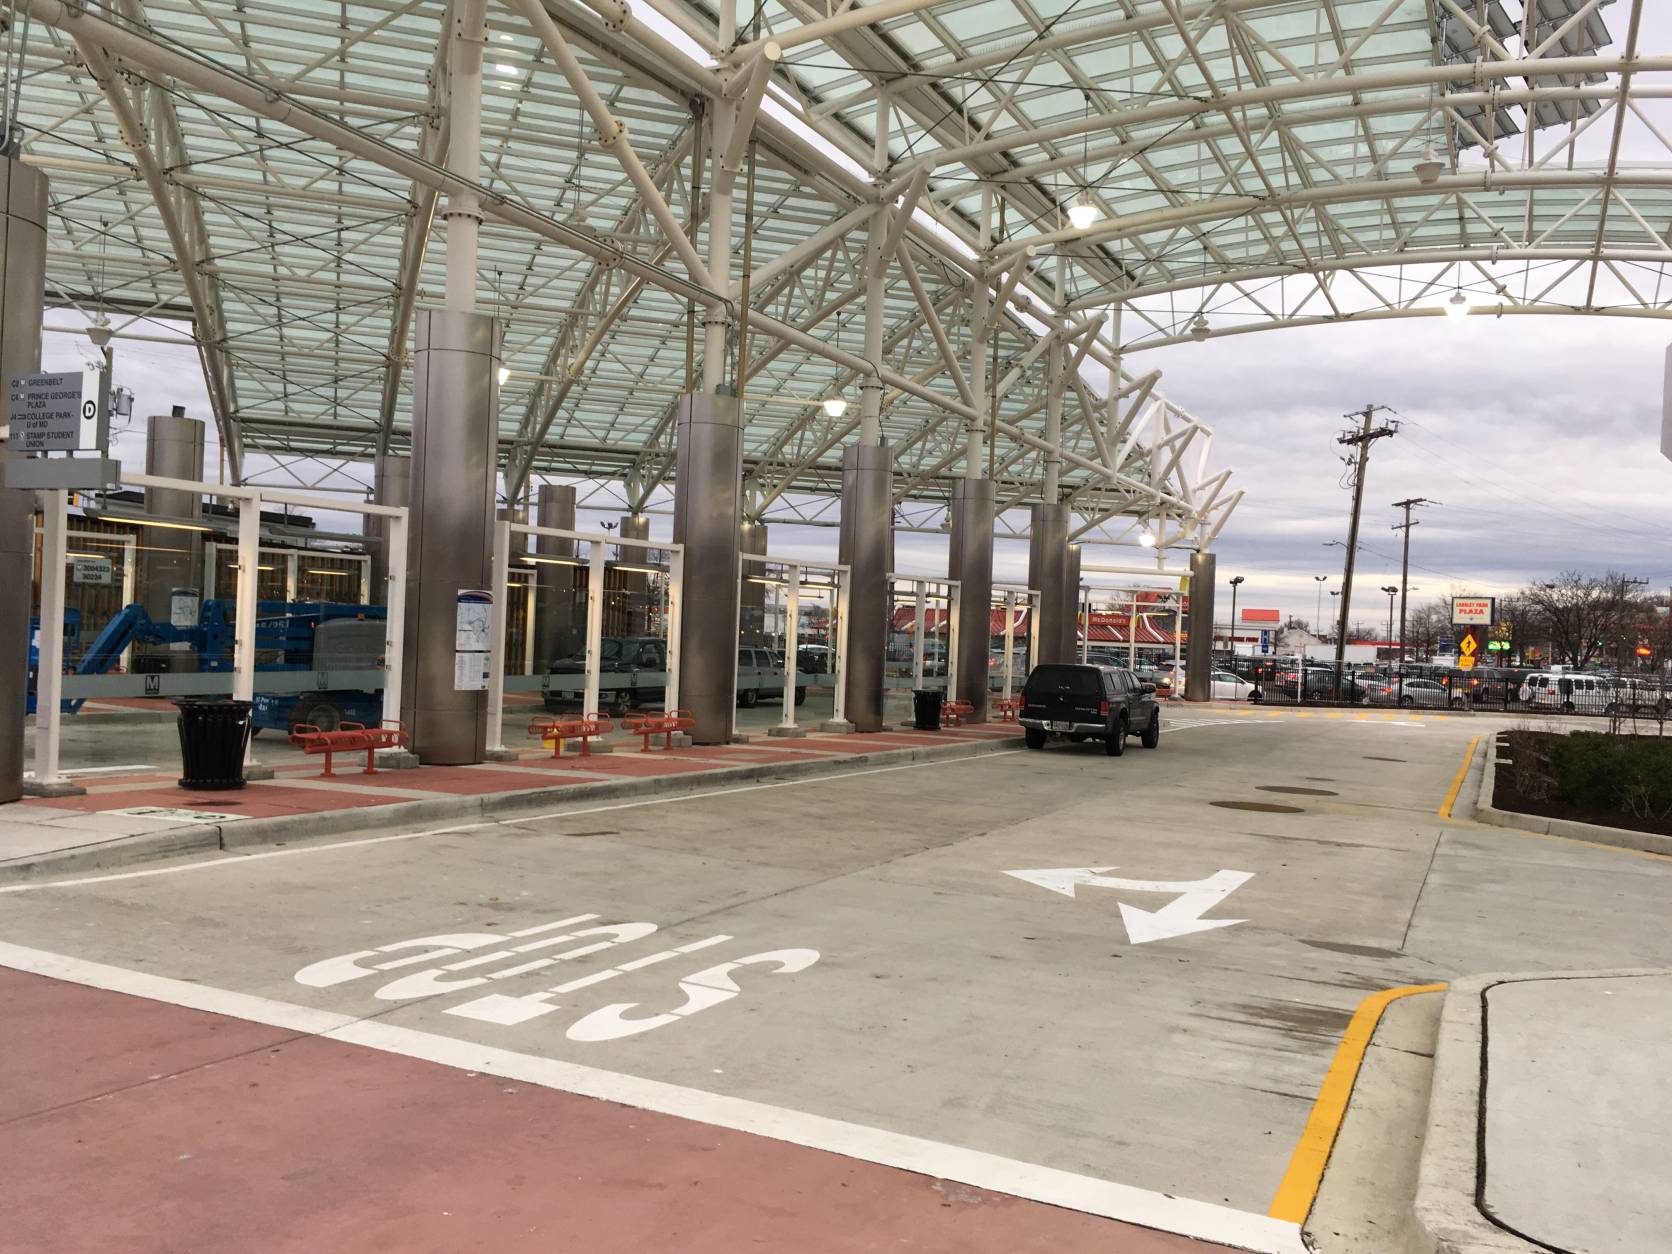 The new transit center in the Langley Park area is expected to serve 12,000 customers each day and will collect some nearby bus stops under its canopy. (WTOP/Liz Anderson)